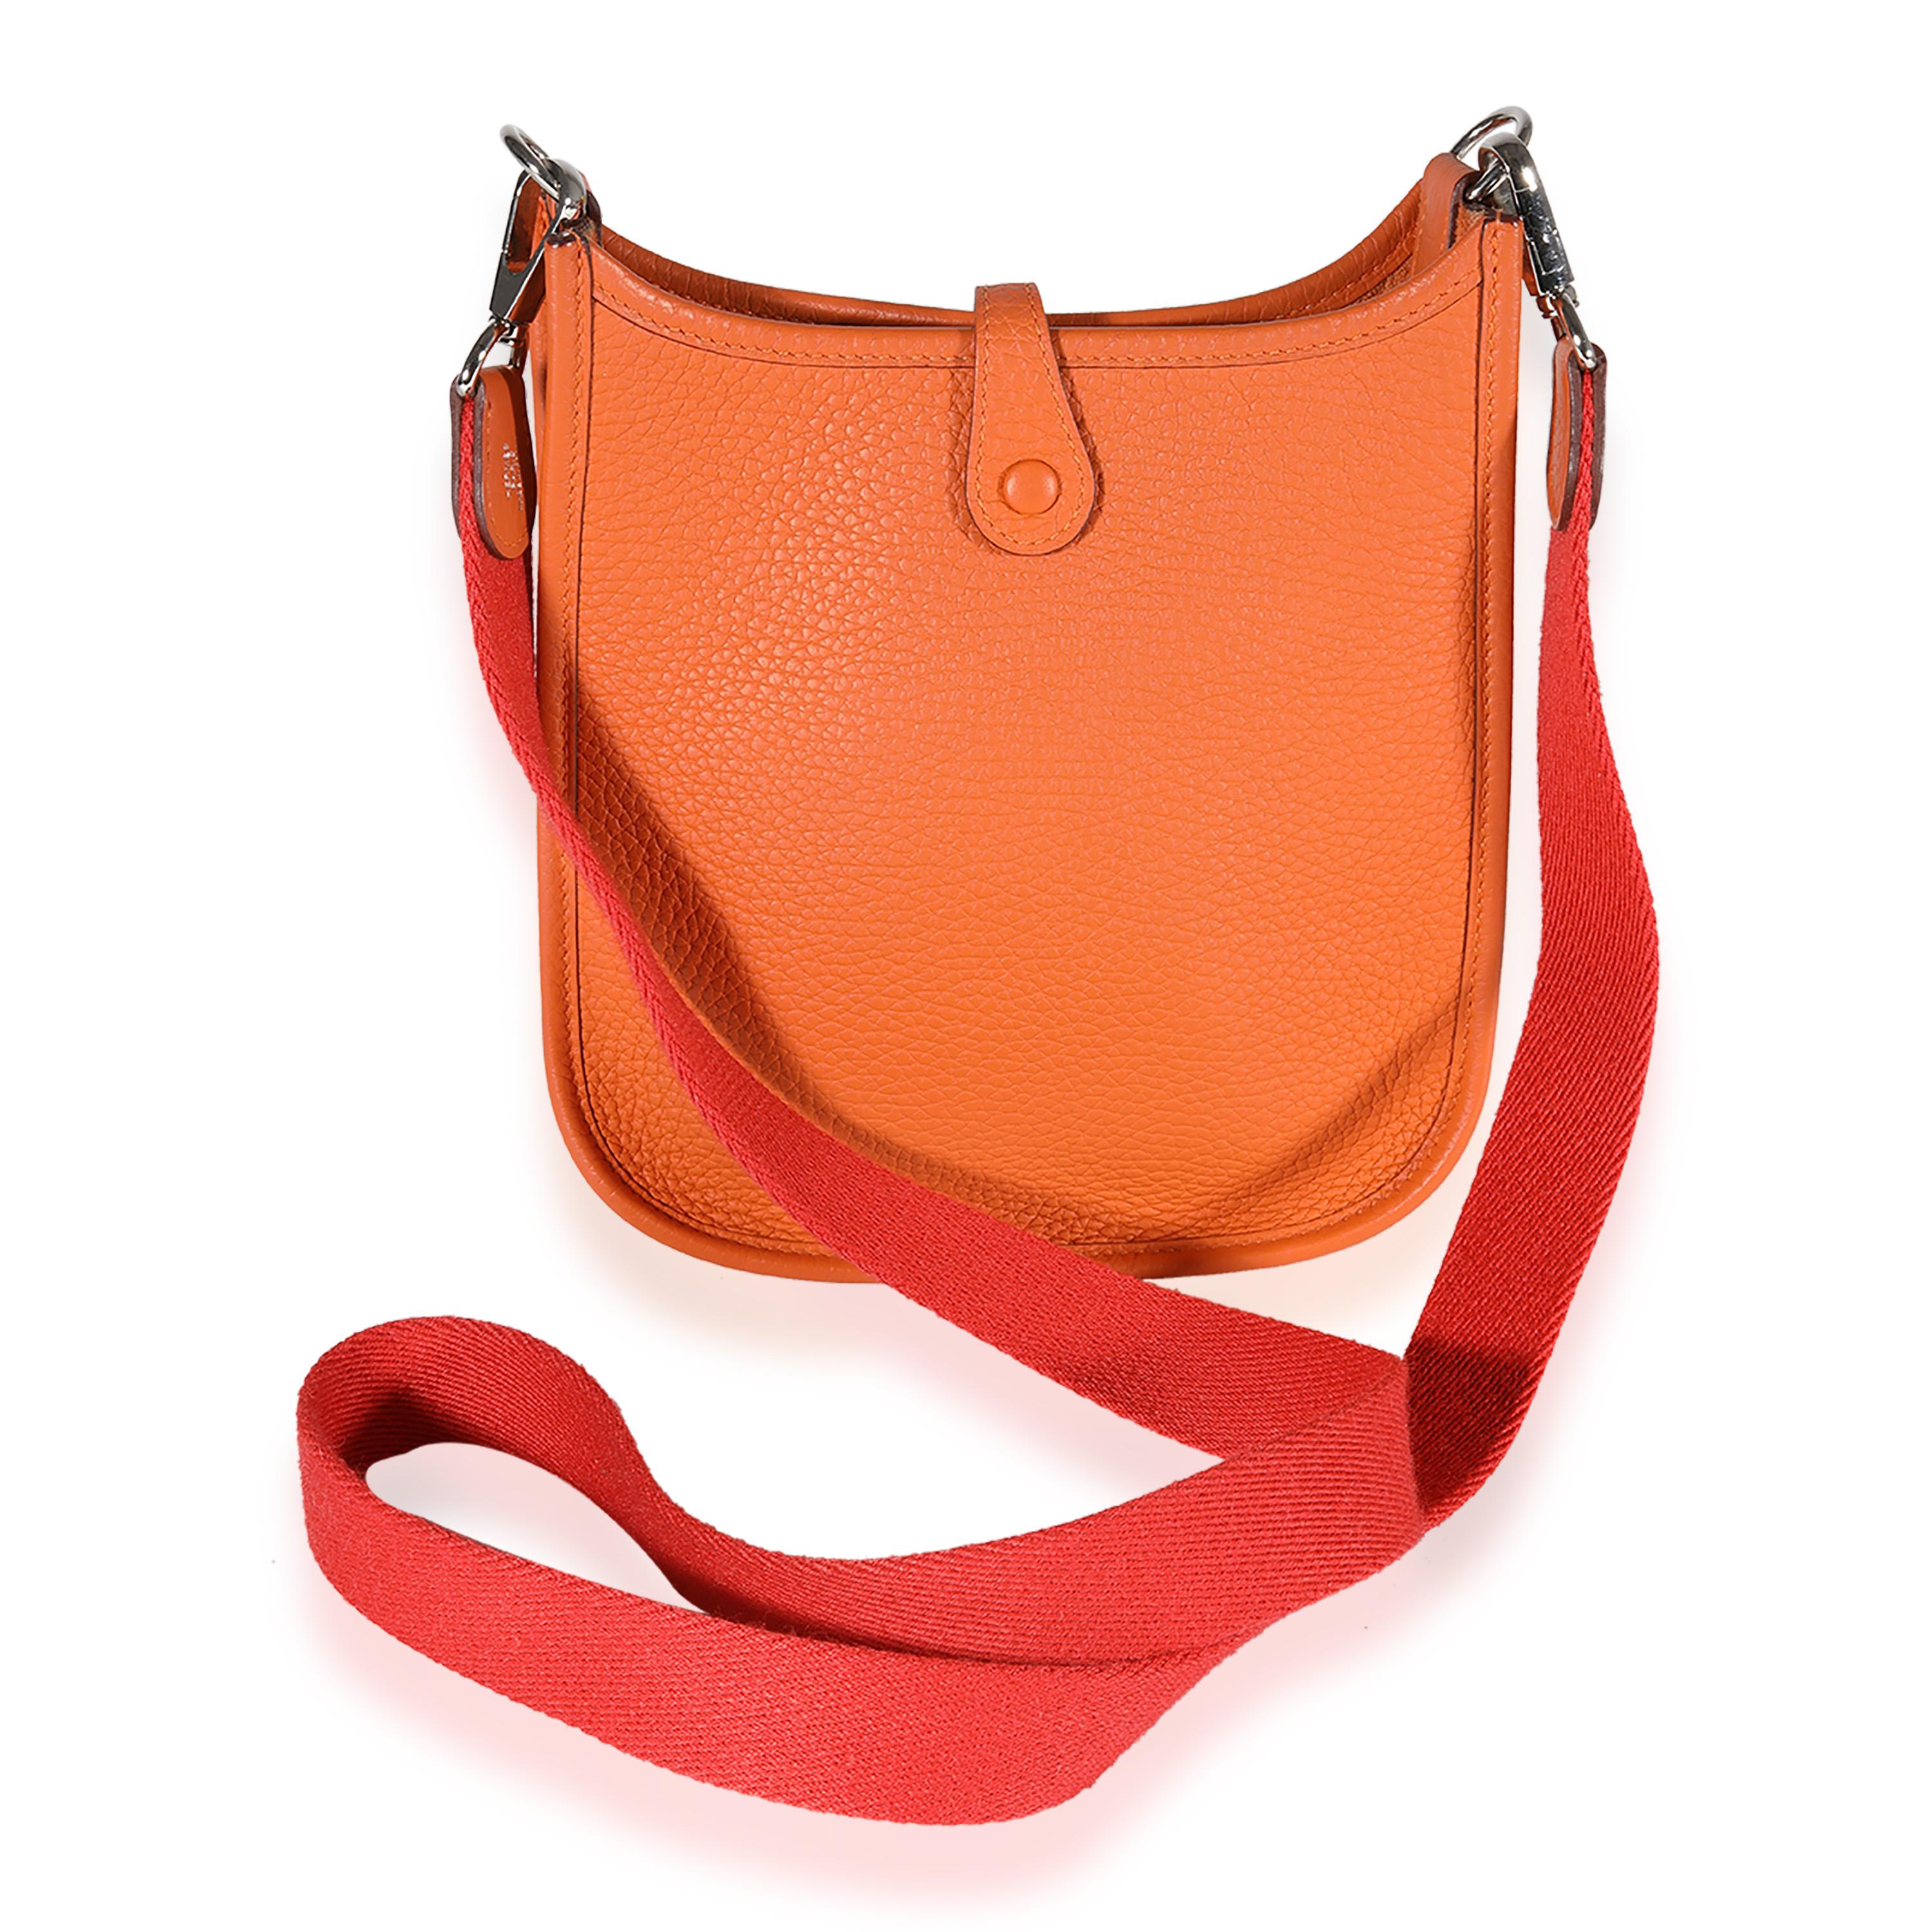 Listing Title: Hermès Orange Clémence Evelyne TPM PHW
SKU: 123243
Condition: Pre-owned 
Handbag Condition: Very Good
Condition Comments: Very Good Condition. Light scuffing at corners. Light interior scuffing. No other visible signs of ear.
Brand: